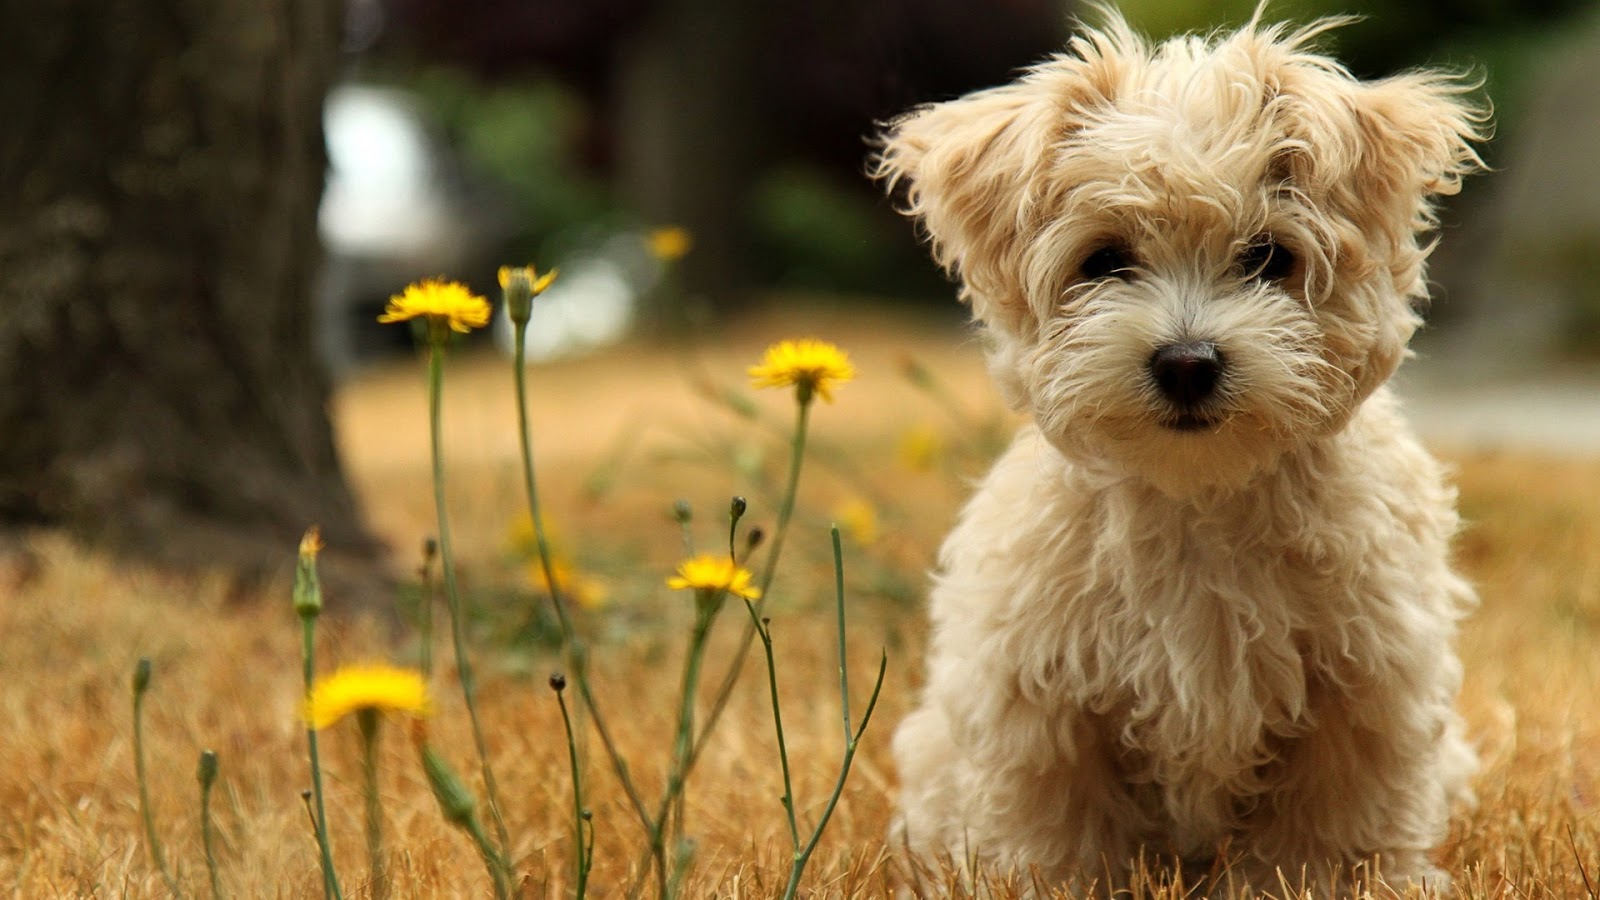 HD Wallpapers  Fine cute  dog baby  dog hd wallpapers  free 